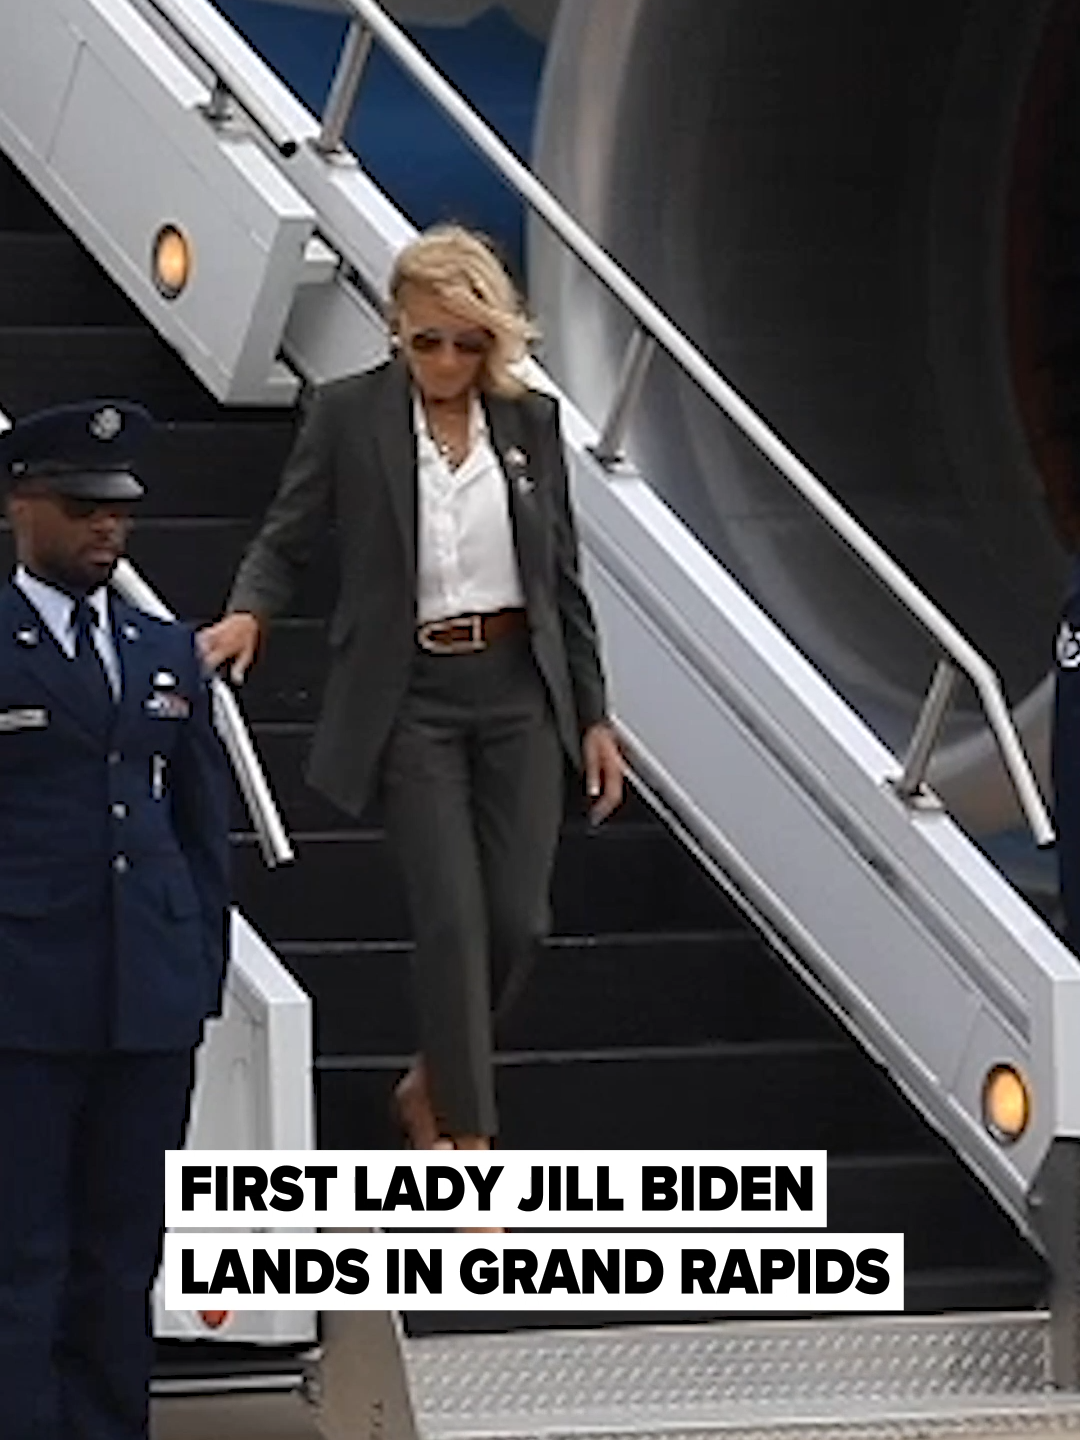 First Lady Jill Biden arrived in Michigan on Tuesday at Gerald R. Ford International Airport for several events this week including a visit to Middleville on Wednesday to support programs for child nutrition and military families before heading to Traverse City. 🎥: Rebecca Particka | MLive #firstlady #jillbiden